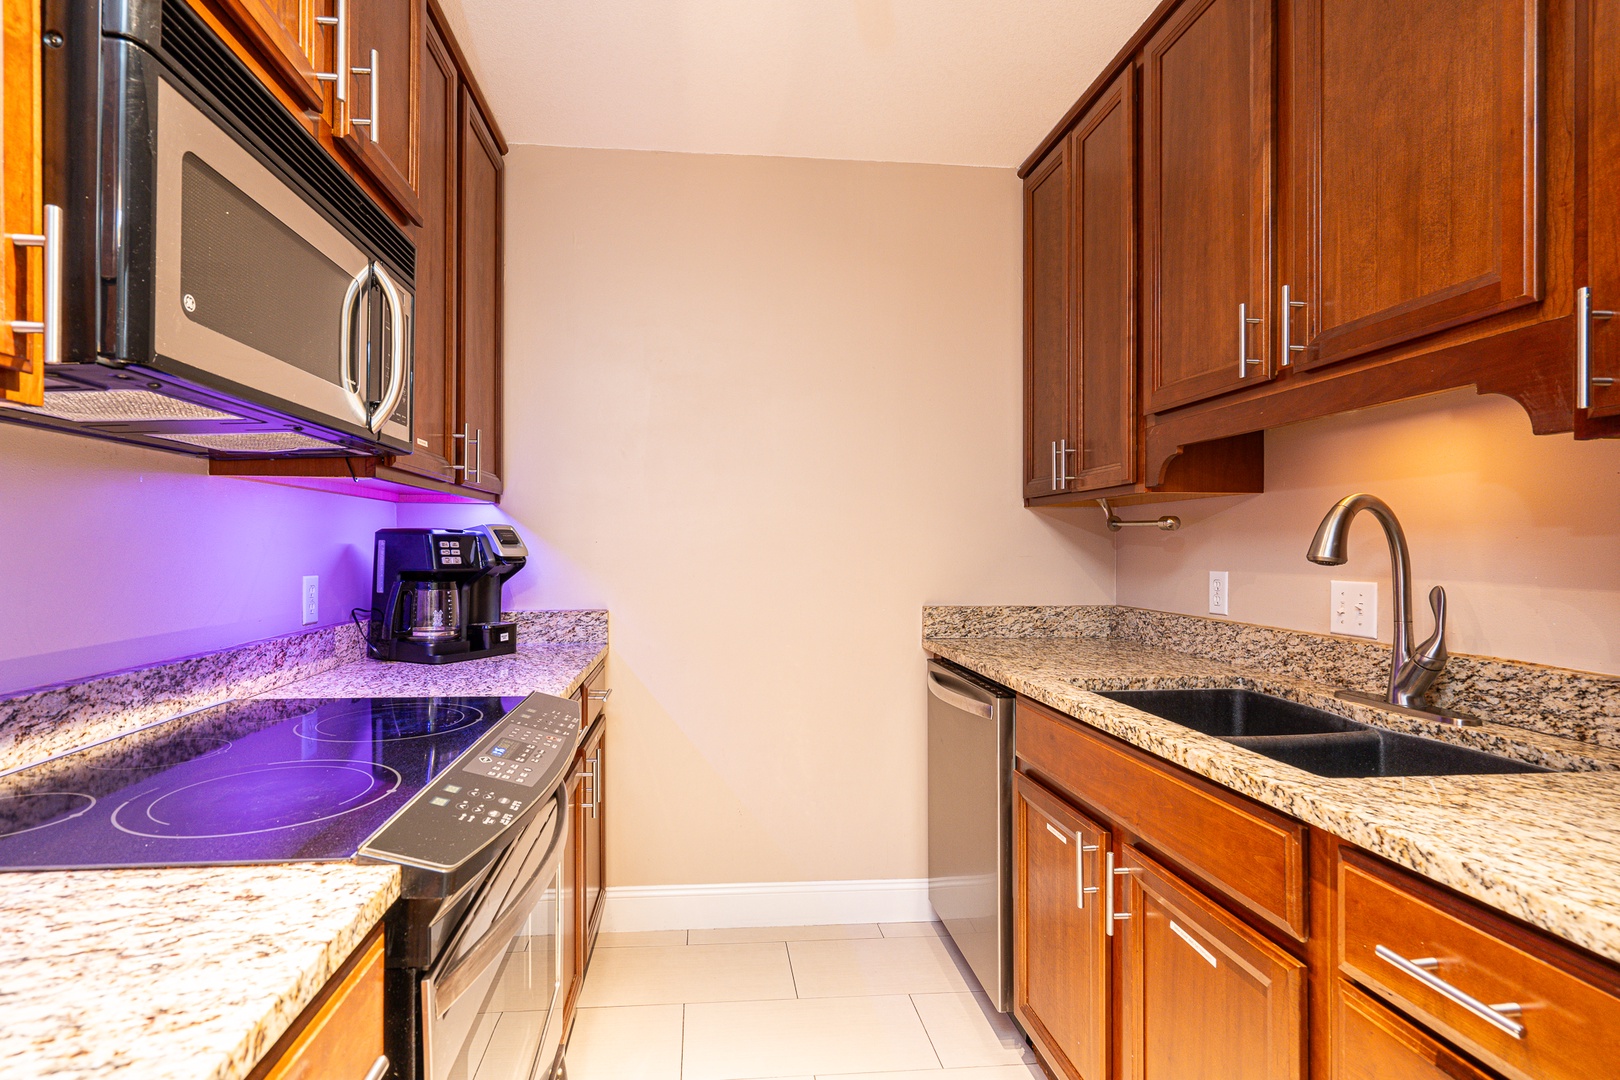 The inviting kitchen offers ample space & all the comforts of home